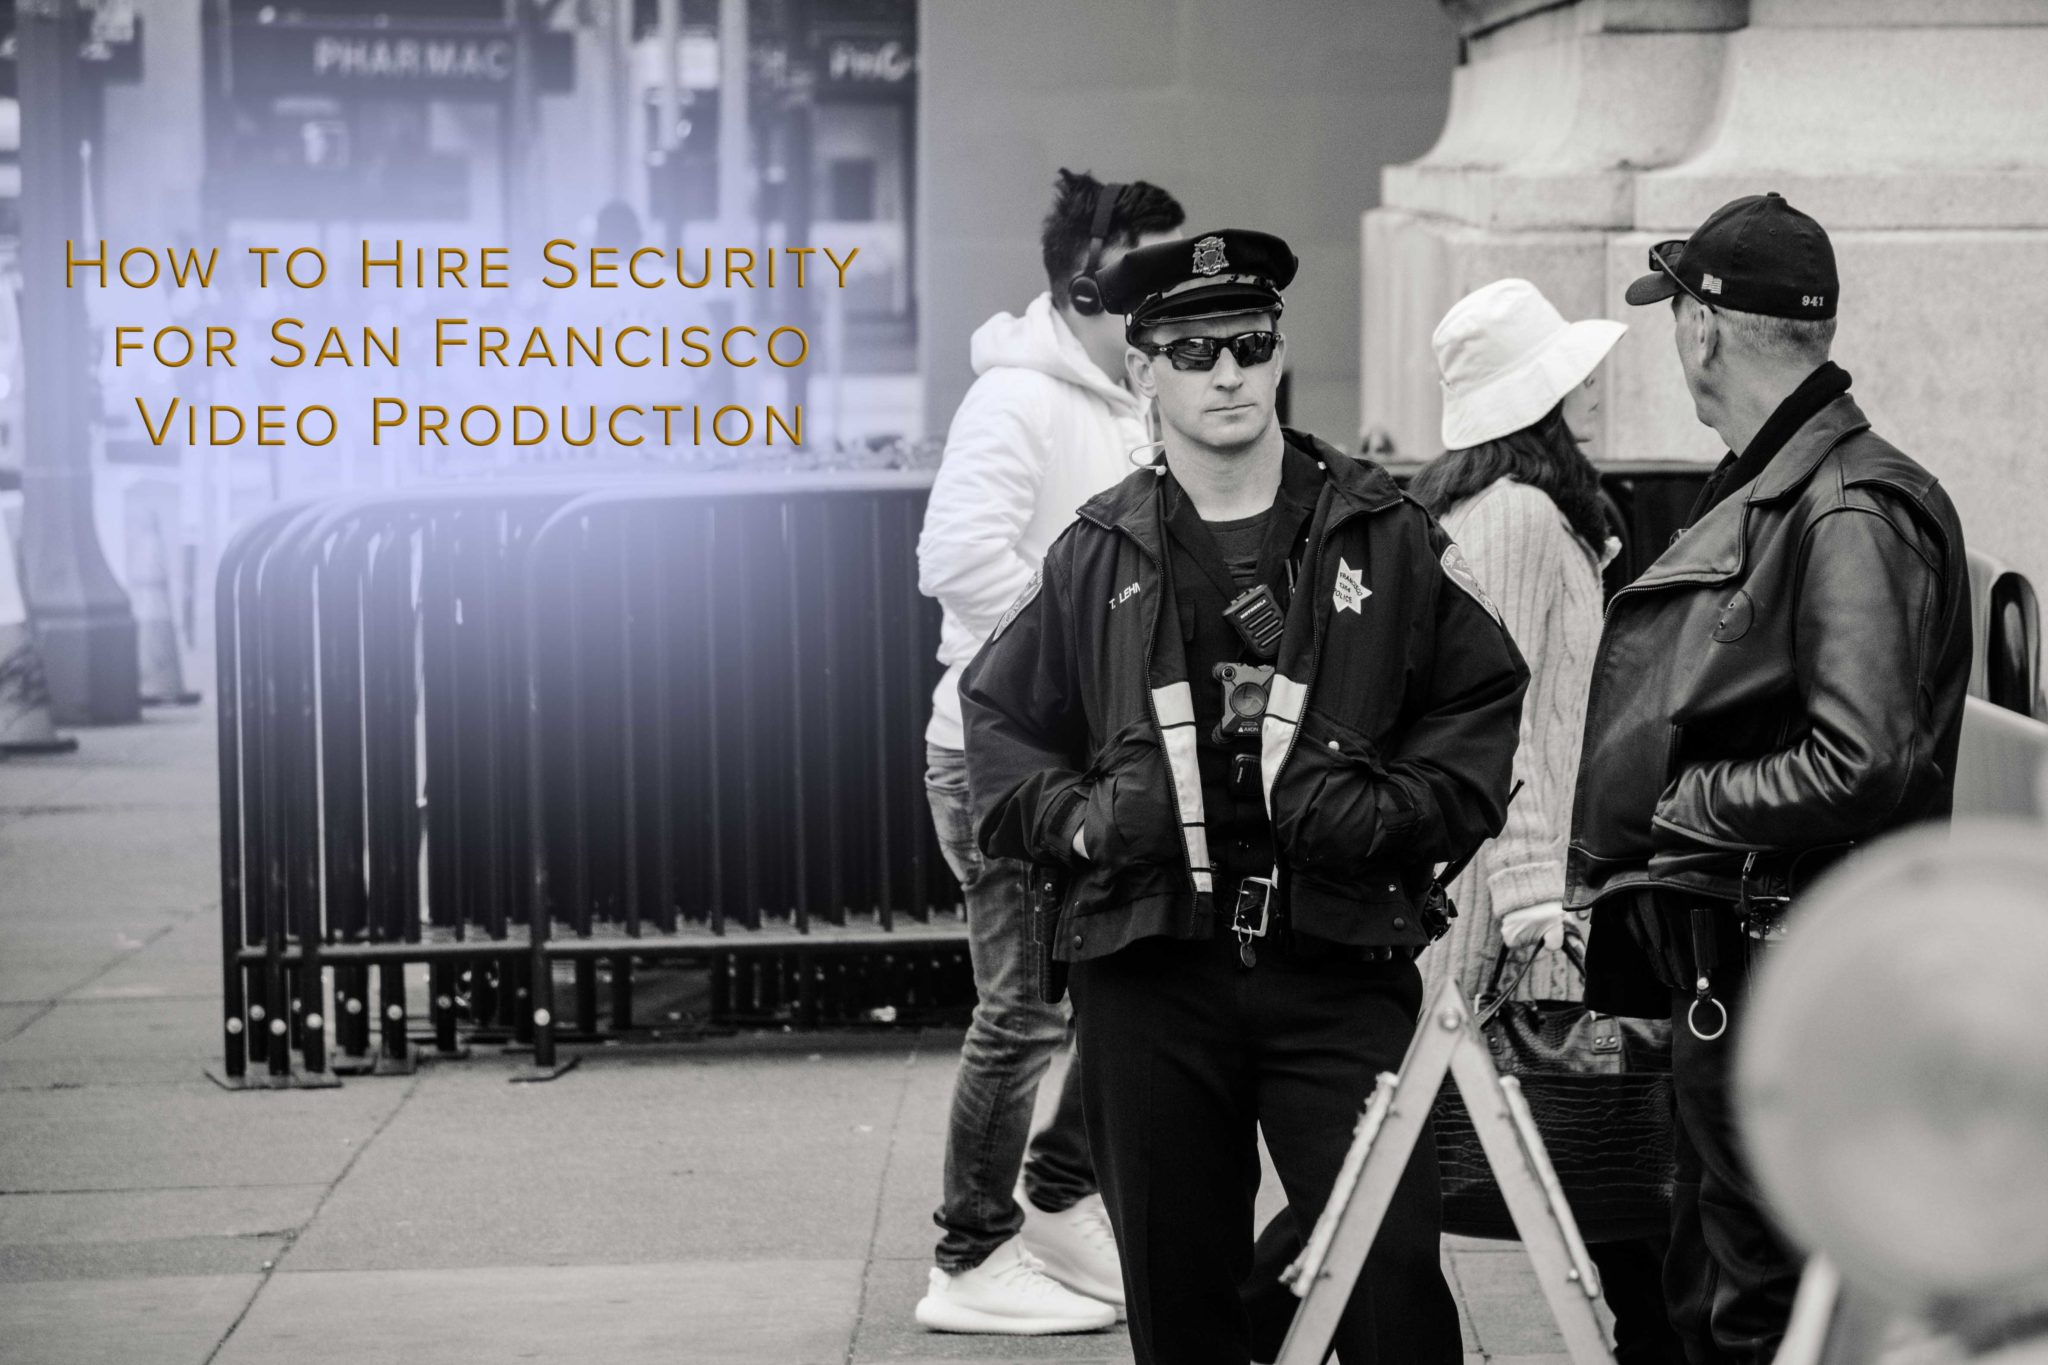 How to Hire Security for San Francisco Video Production